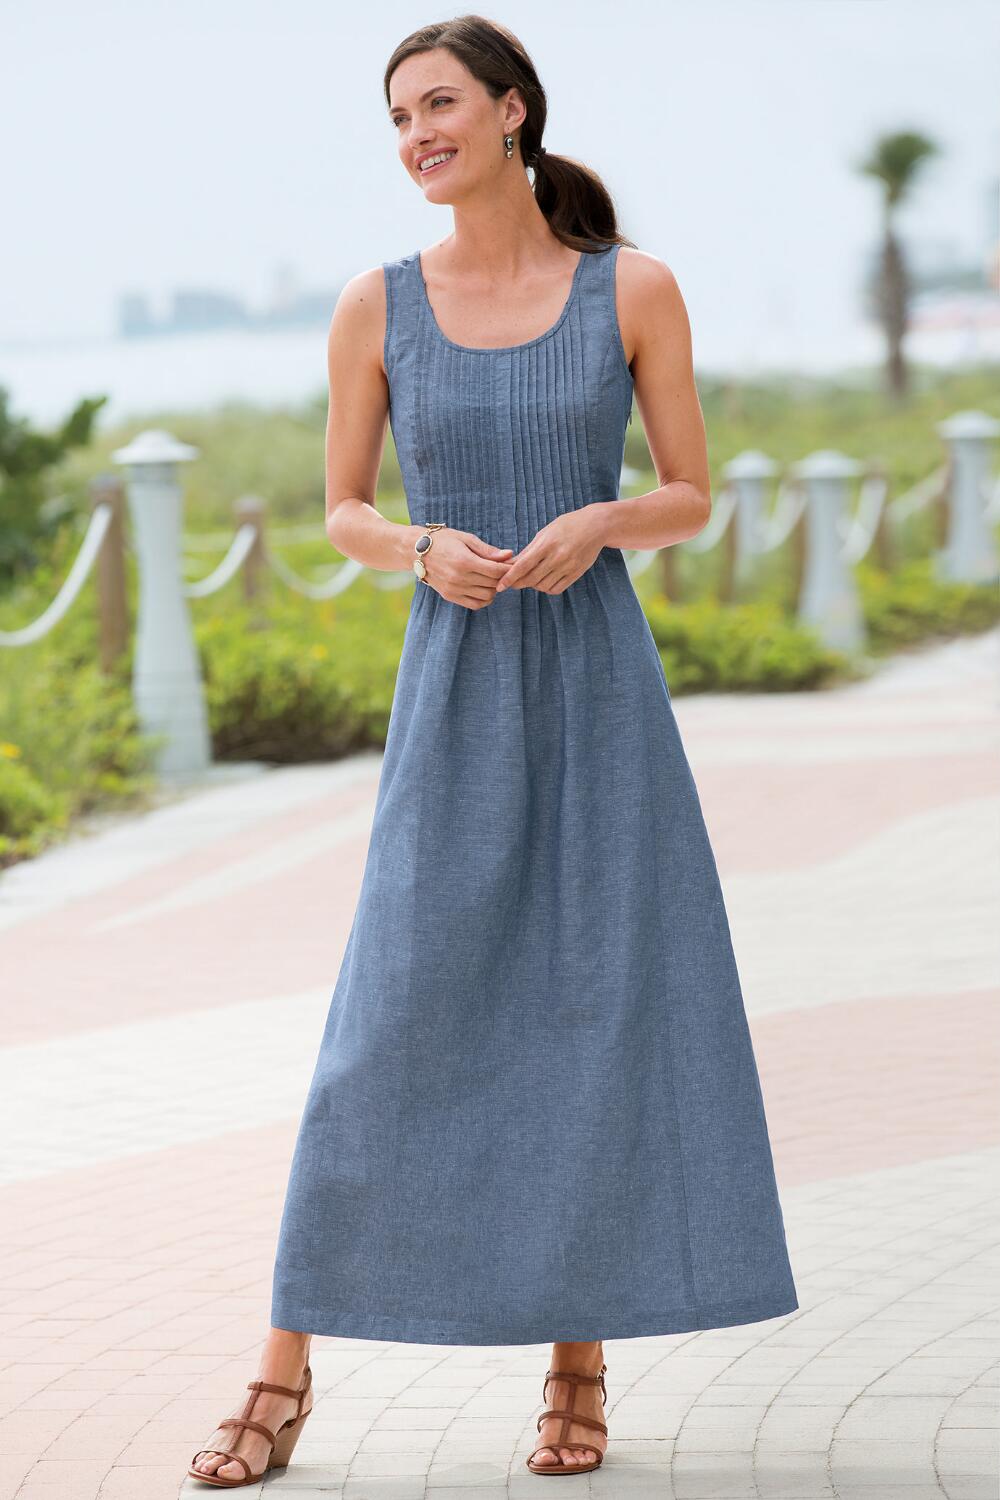 When it comes to the summer heat, a maxi dress is the perfect companion. This Chambray maxi dress features a pintucked waist, which helps this style to not come across as boxy and it gives your body some definition. You can go casual and wear it with a pair of wedge sandals or dress it up a bit and add strappy heels. The great feature about this maxi dress outfit is it doesn’t require much thought to put together a super cute summer outfit.